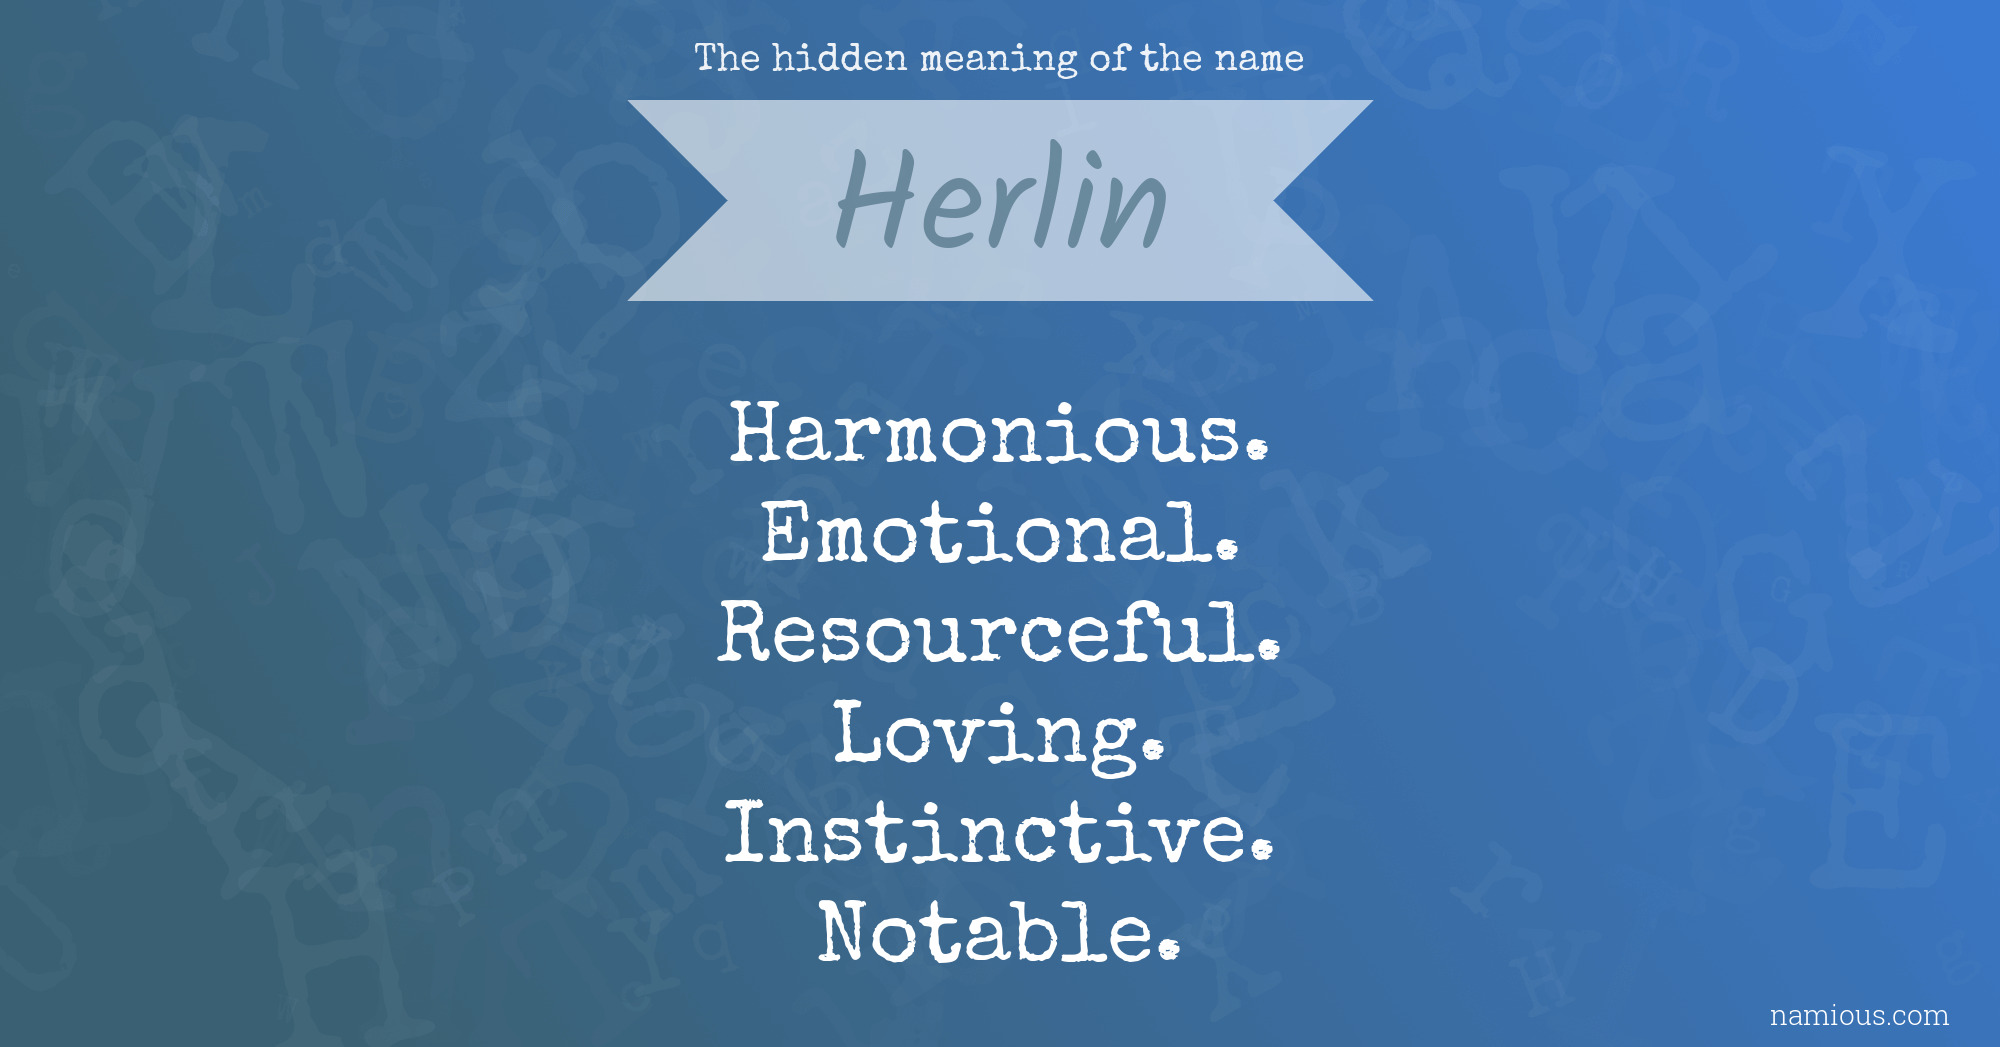 The hidden meaning of the name Herlin